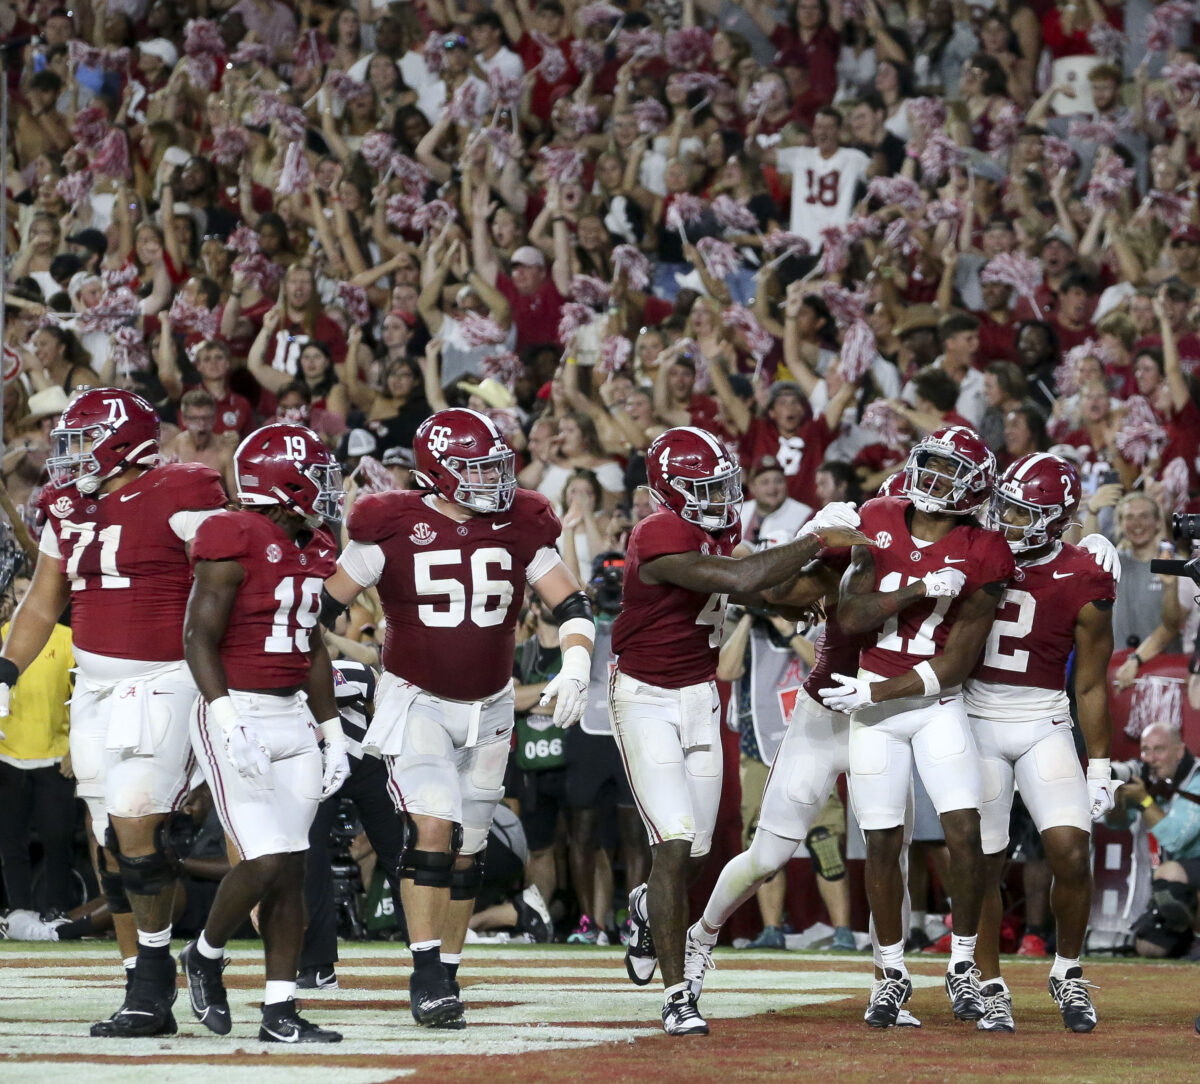 Roll Tide Wire staff predictions for Alabama vs. Ole Miss